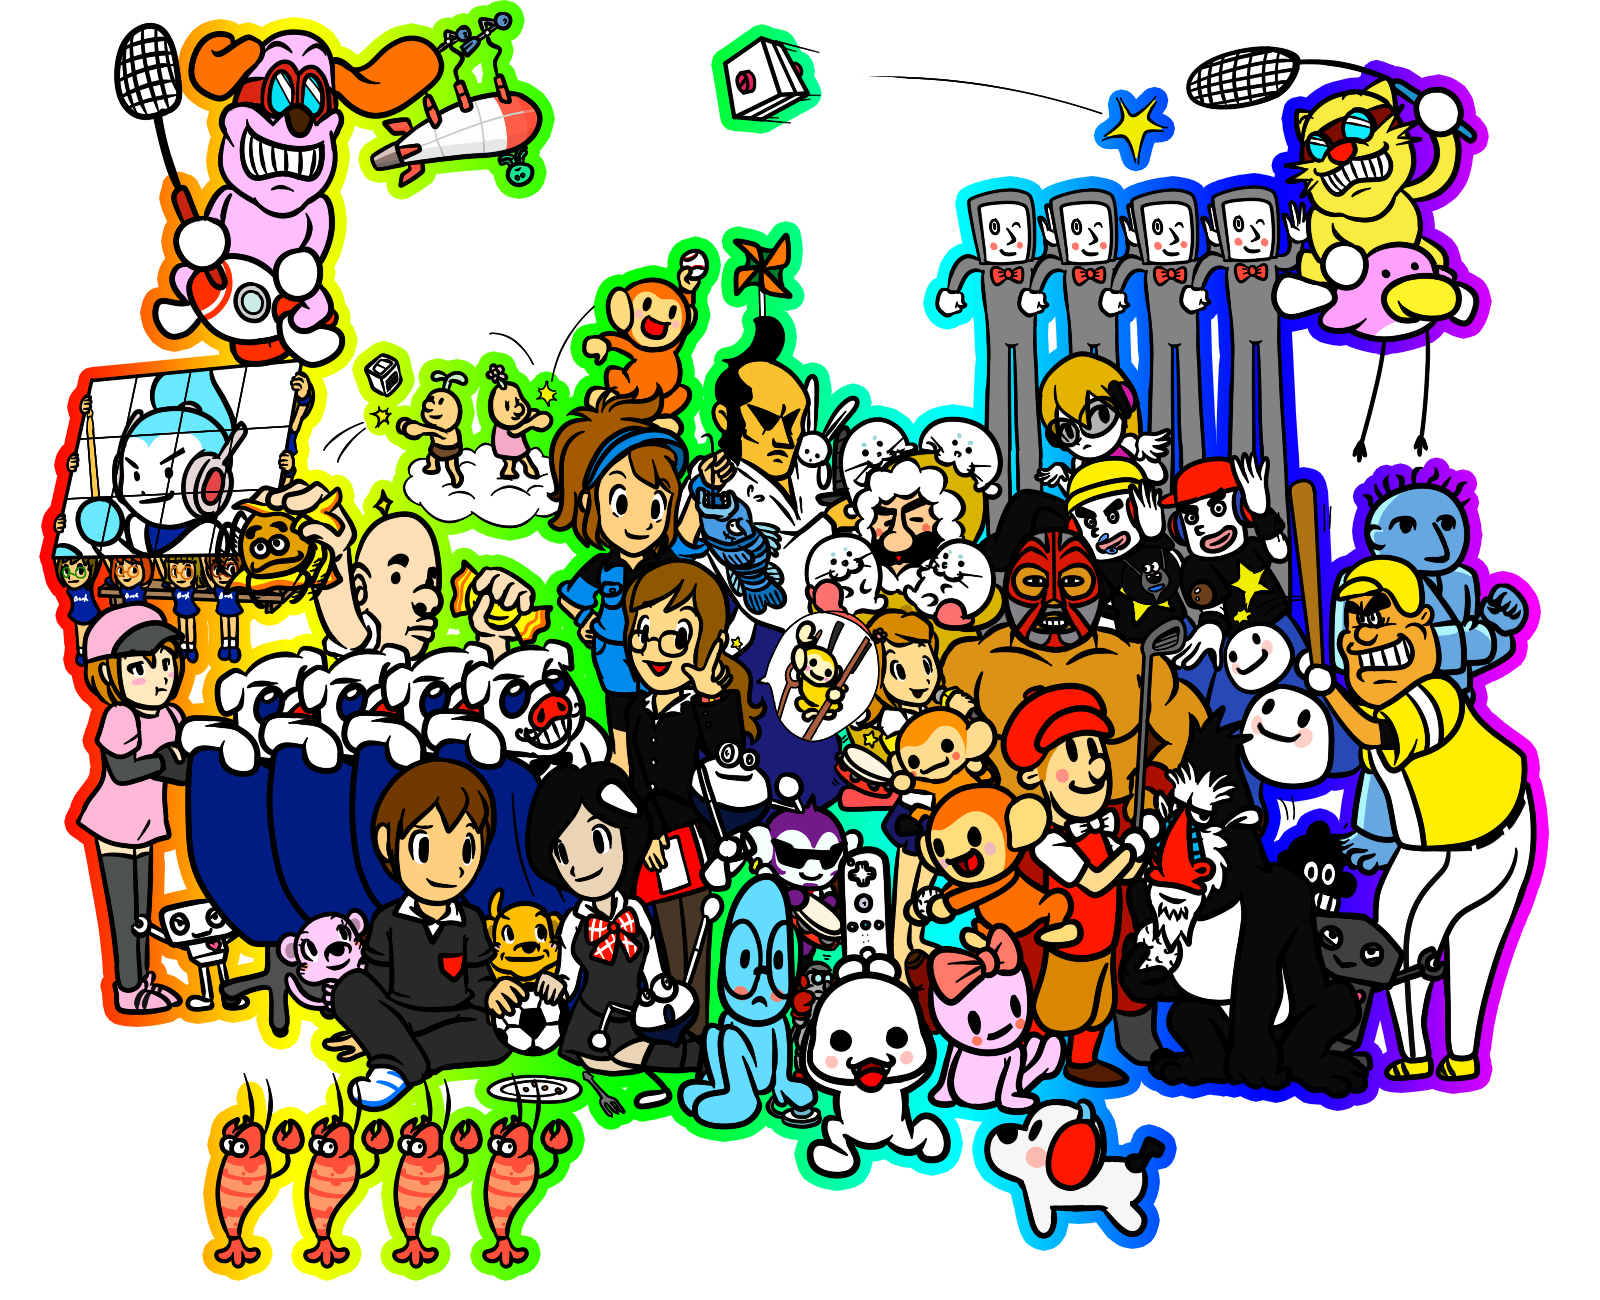 rhythm_heaven_wii_by_catchshiro-d47nfeb.png